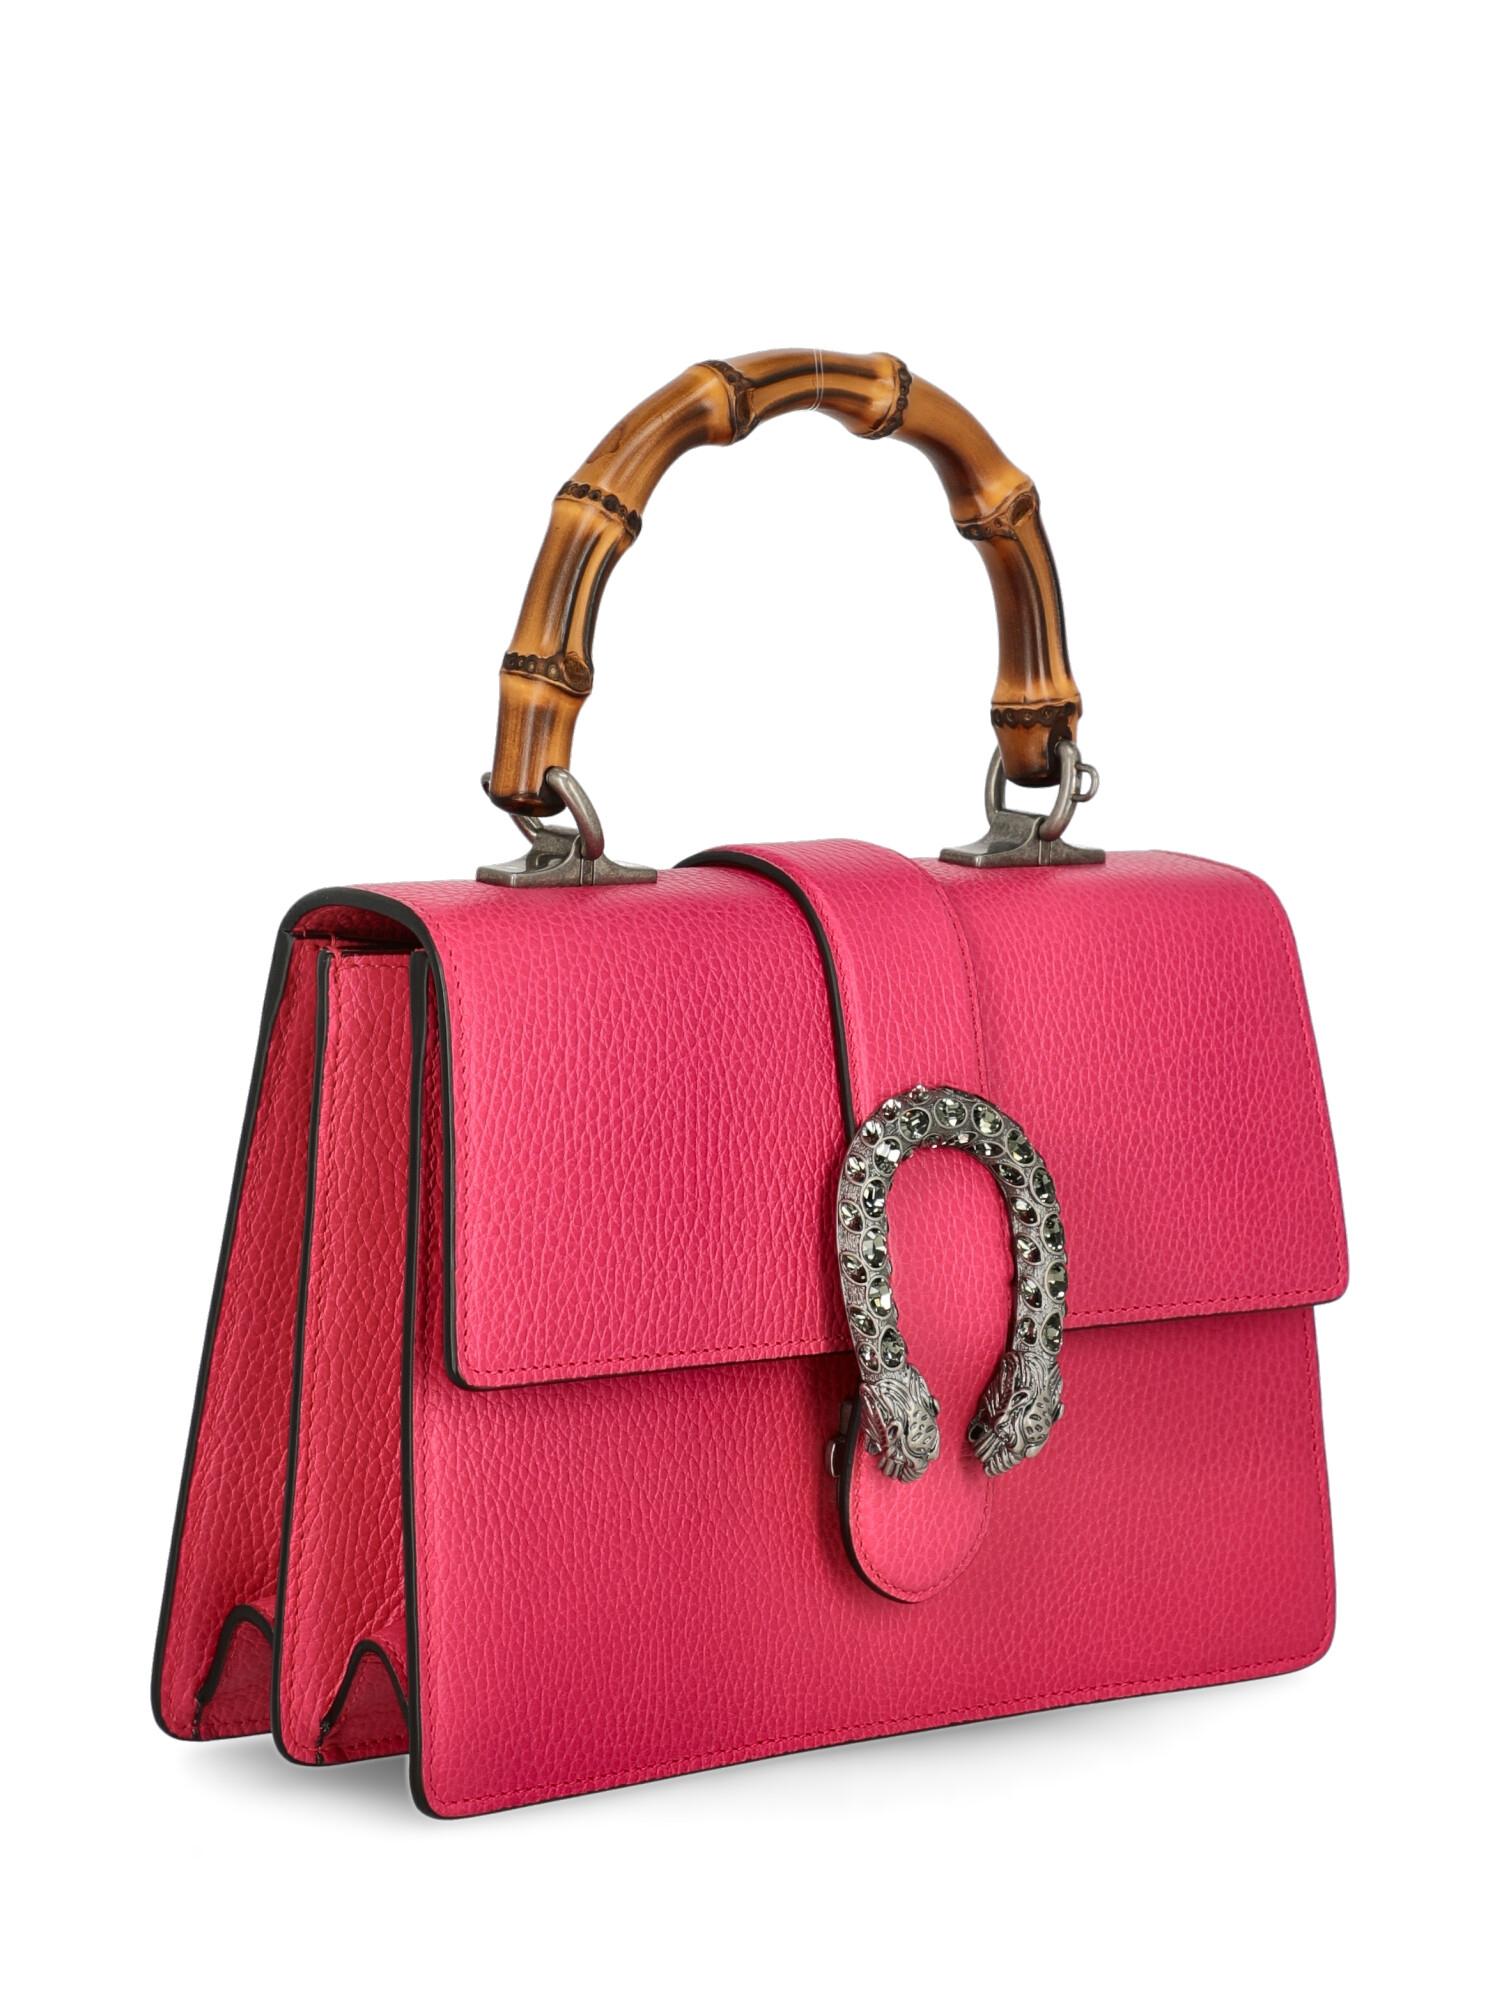 Gucci Women's Handbag Dionysus Pink Leather In Excellent Condition For Sale In Milan, IT